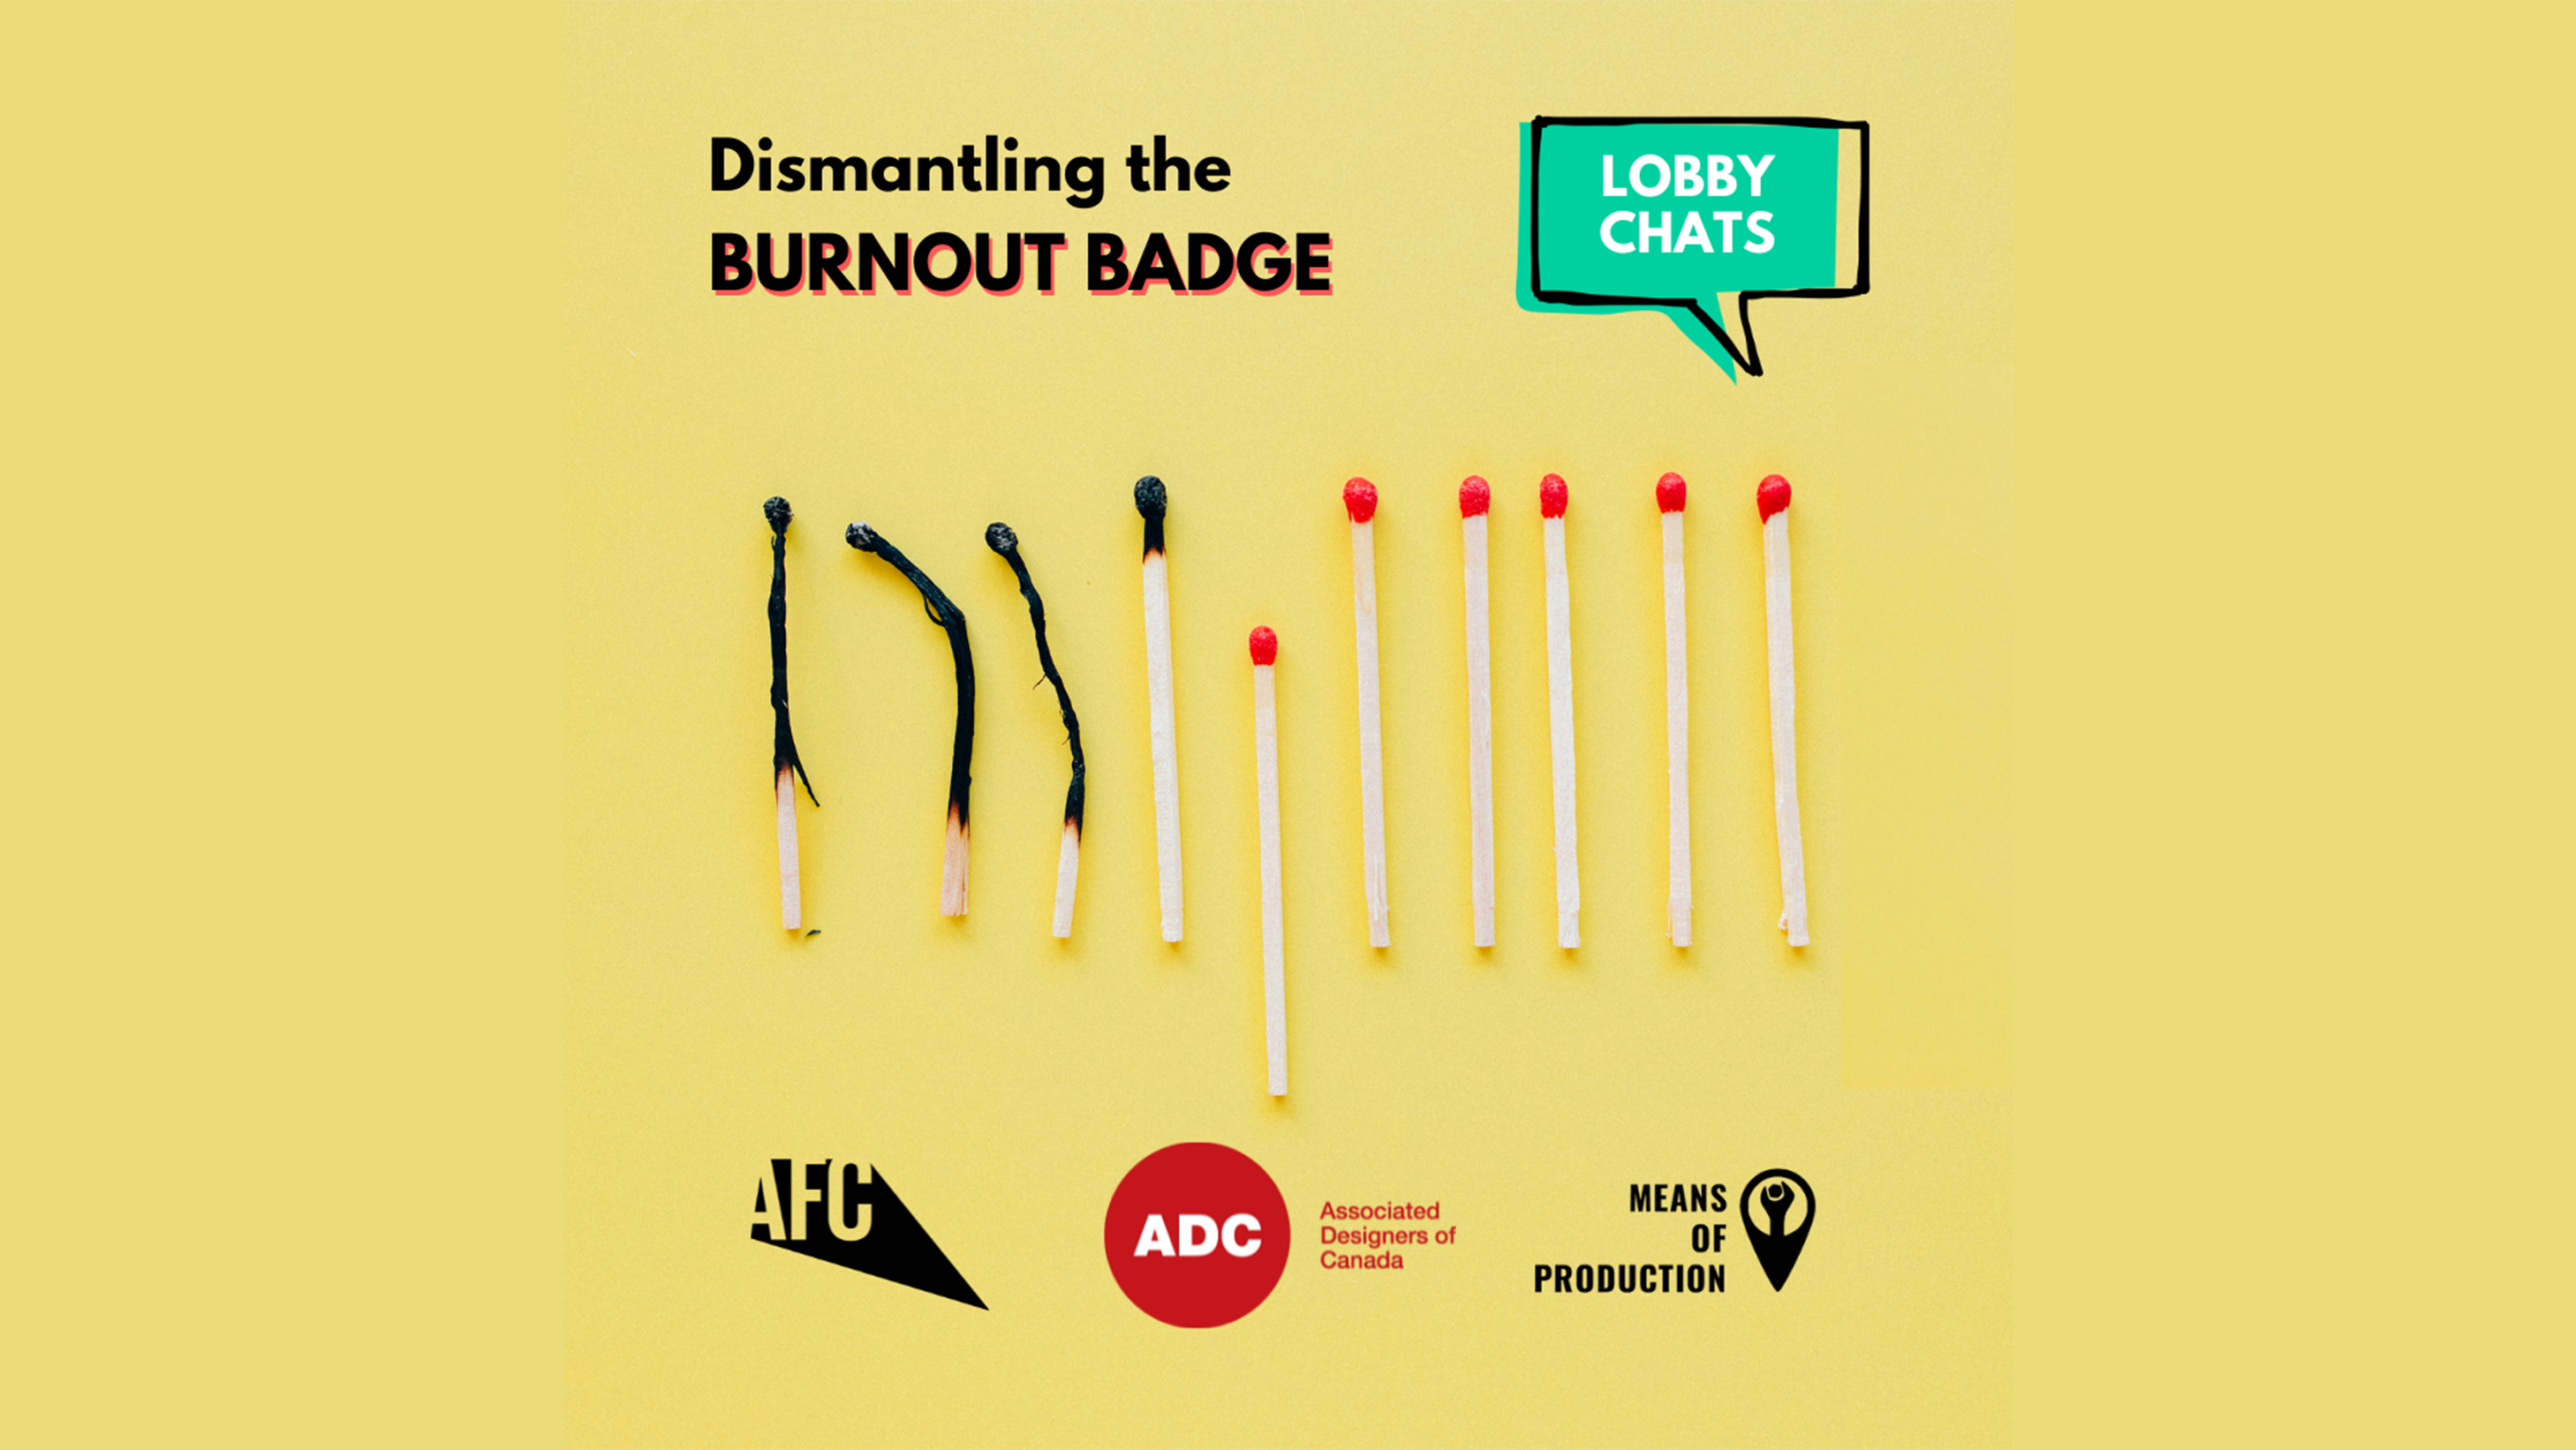 Lobby Chats: Dismantling the Burnout Badge